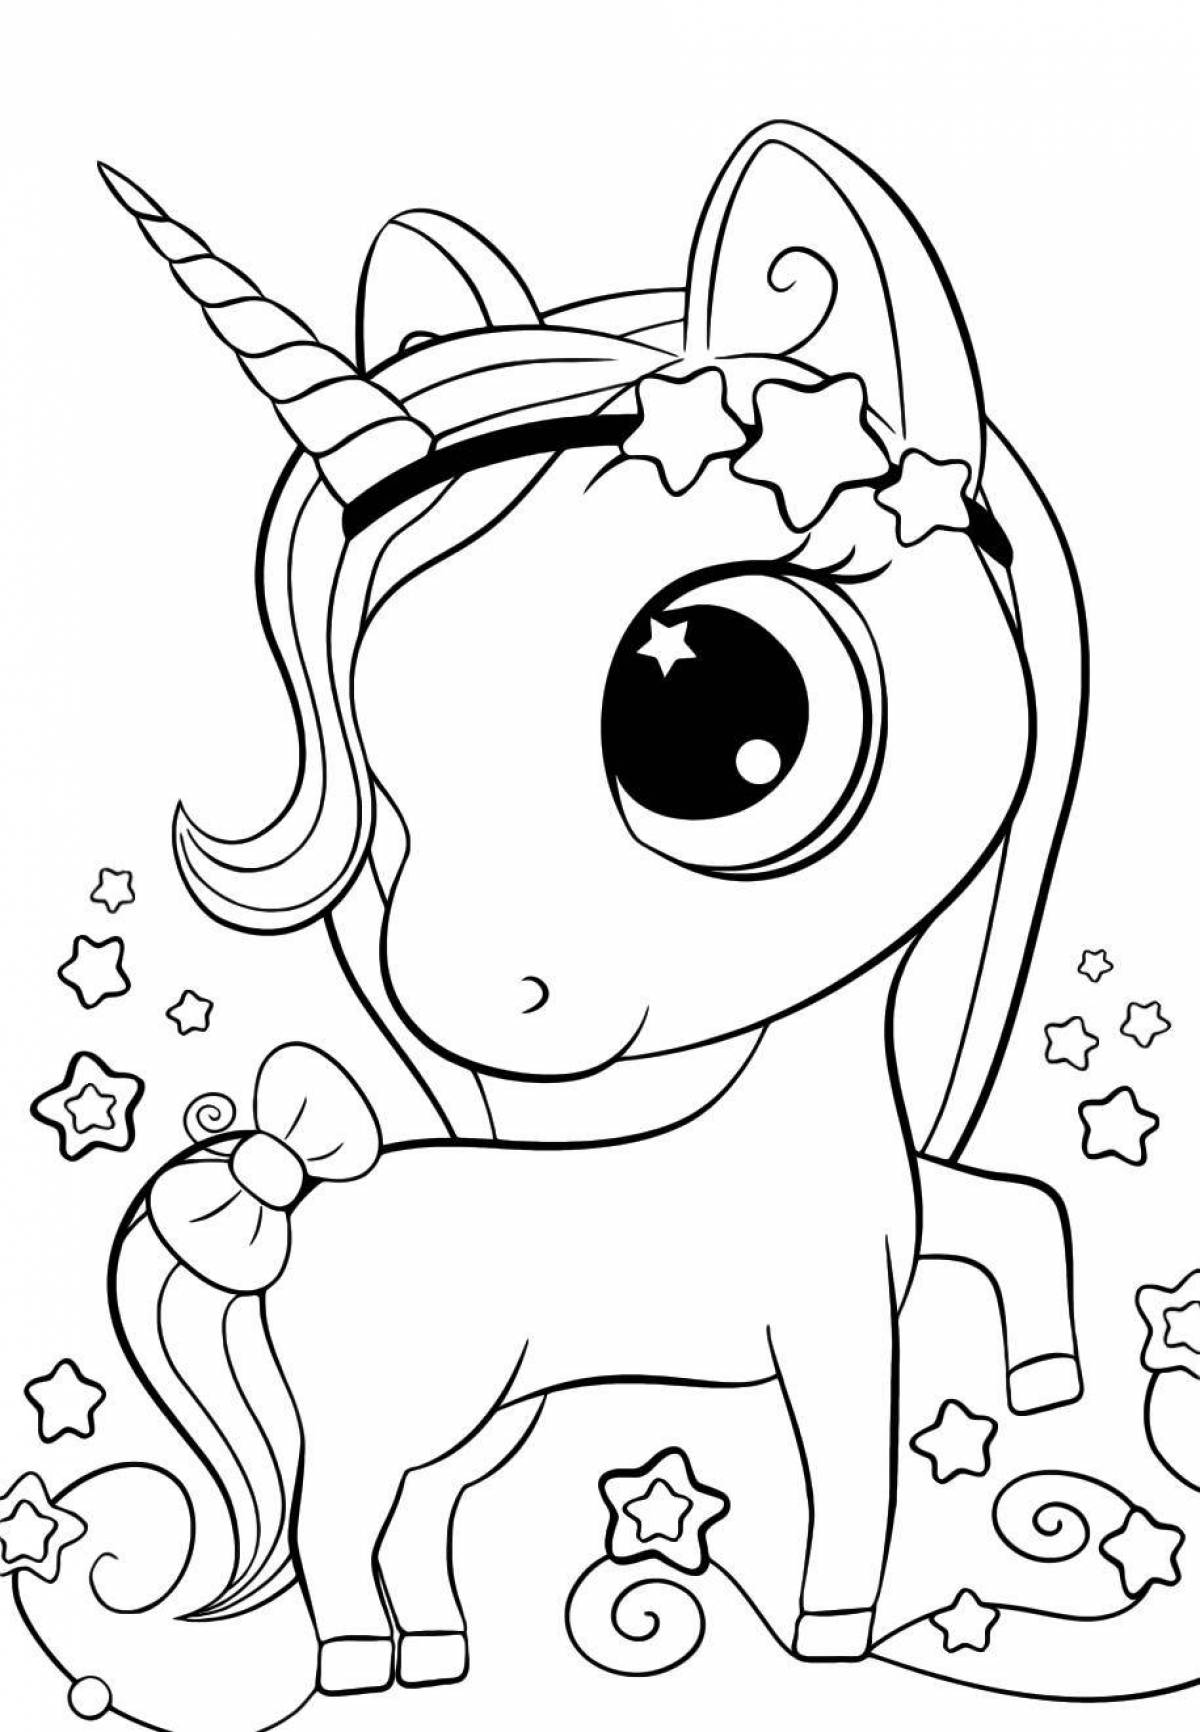 Adorable unicorn coloring book for 5 year old girls